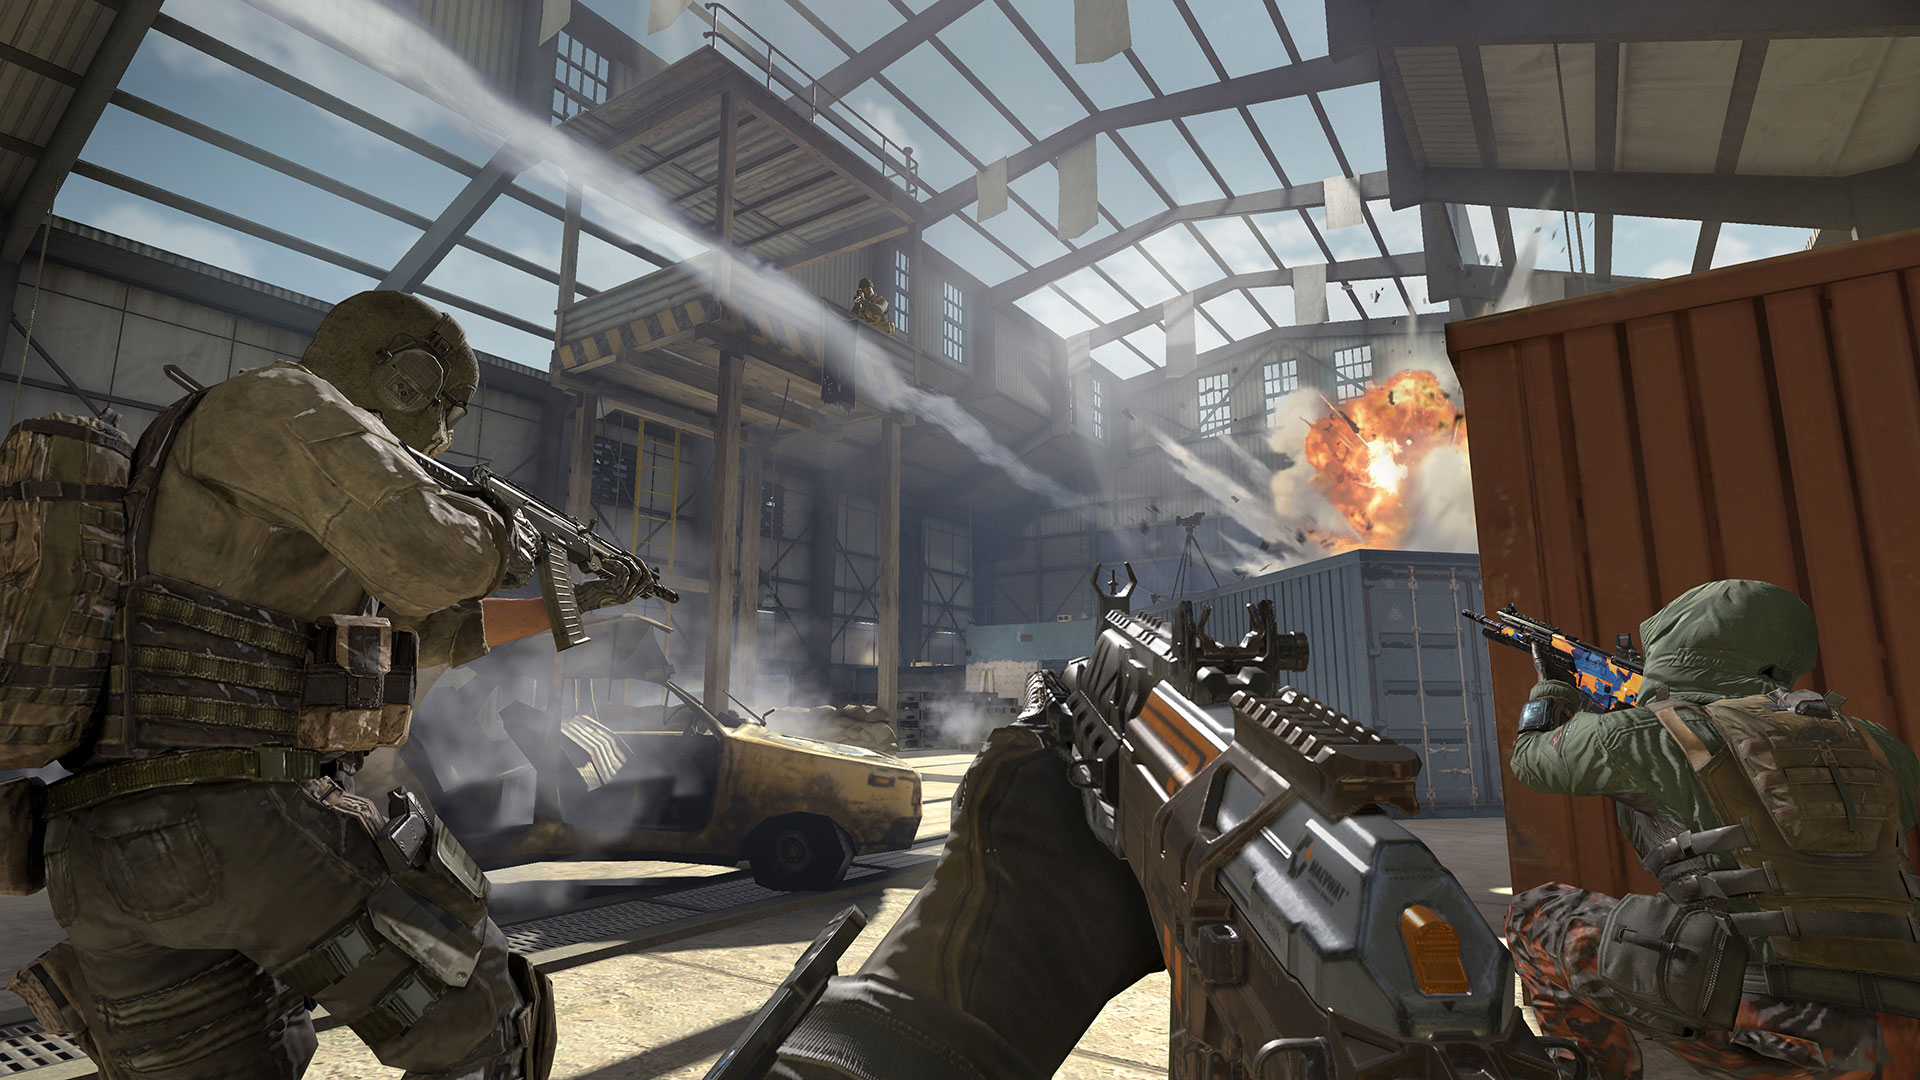 Call of Duty Mobile on PC - Download Battle Royale Game for Free